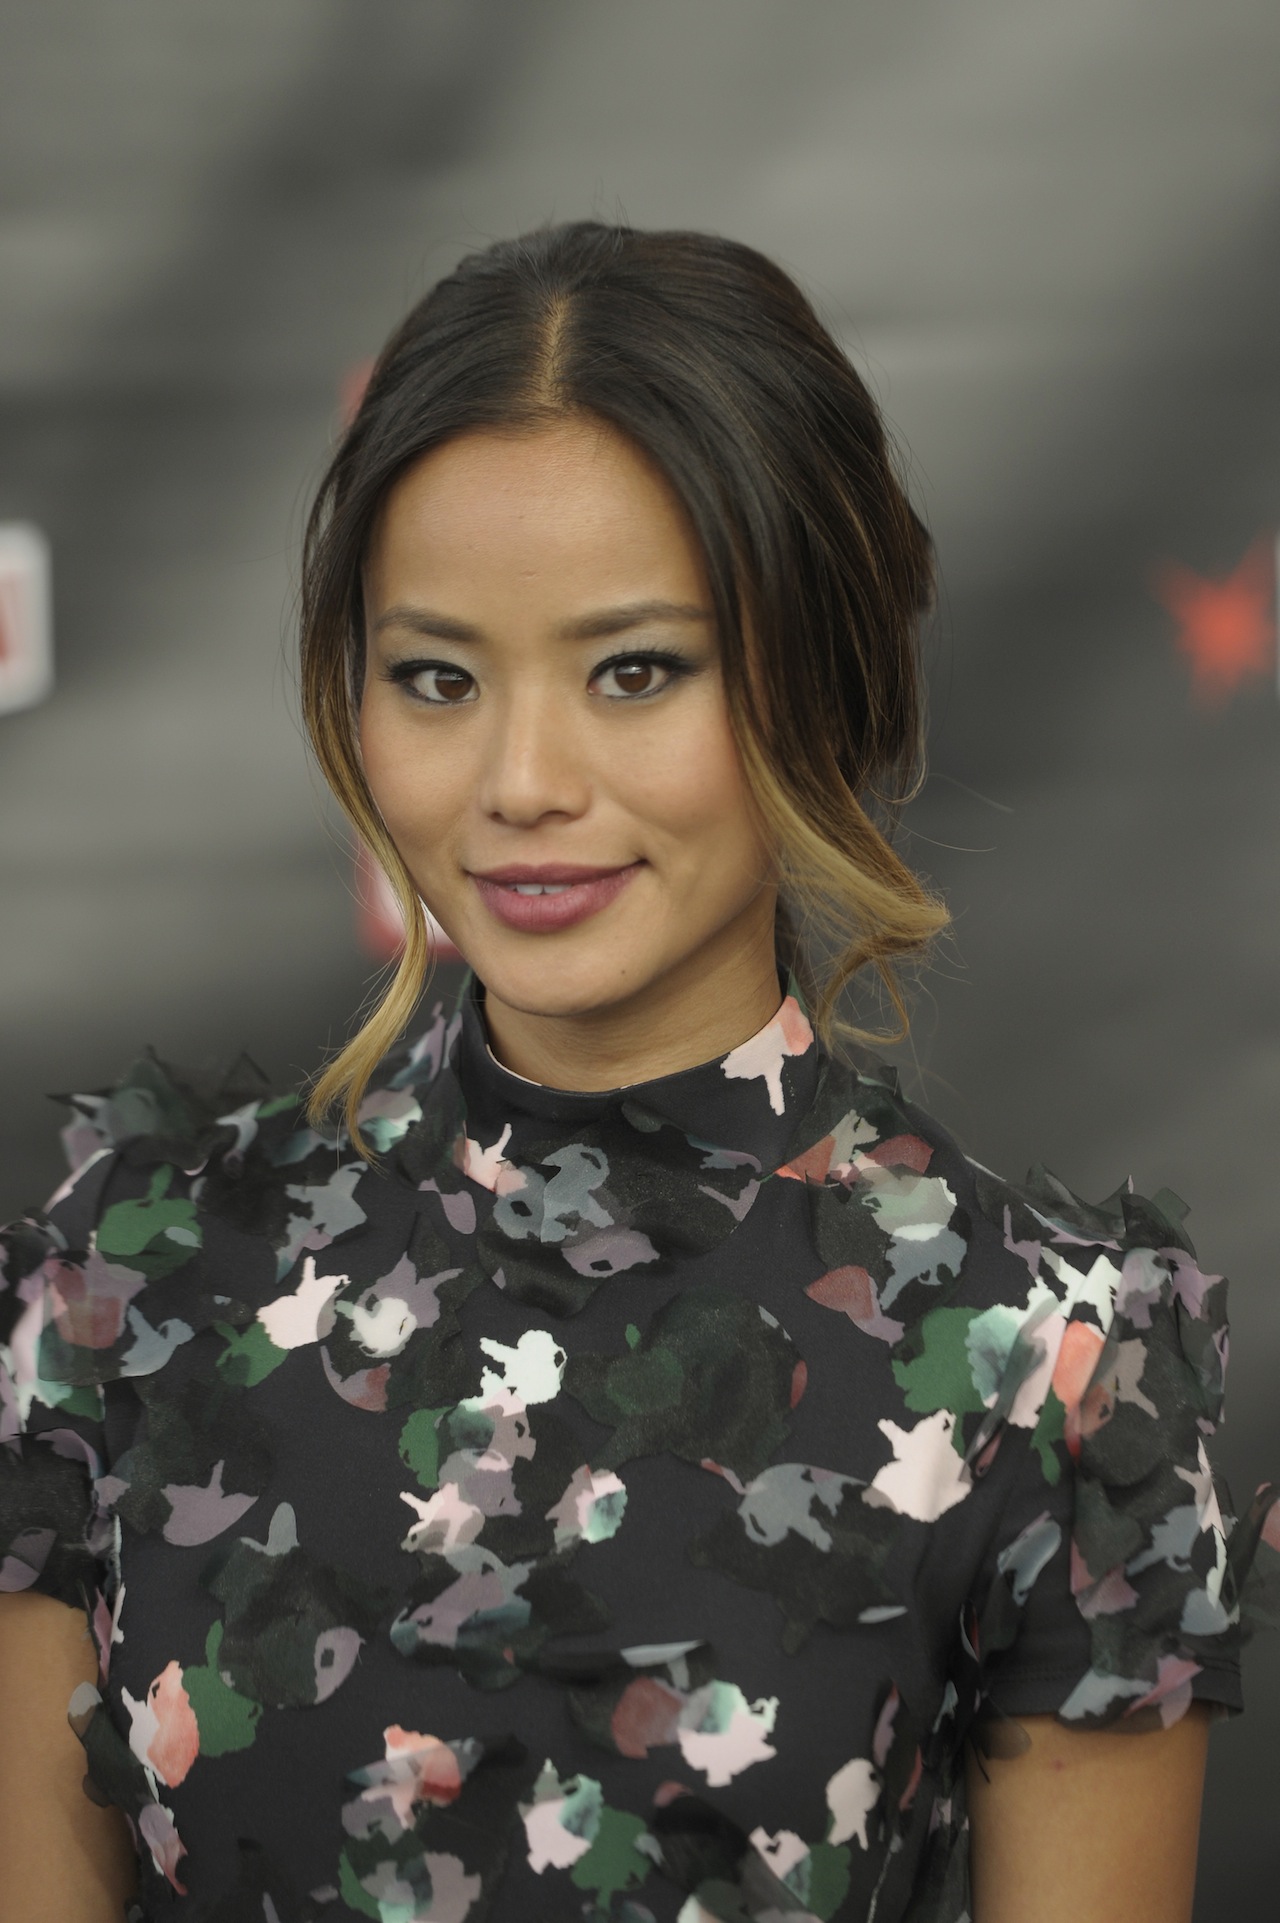 NEW YORK, NY - OCTOBER 09:  Actress Jamie Chung attends Walt Disney Studios' 2014 New York Comic Con presentations of "Big Hero 6" and "Tomorrowland" at the Javits Convention Center on Thursday October 9, 2014 in New York City.  (Photo by Stephen Lovekin/Getty Images for Disney) *** Local Caption *** Jamie Chung